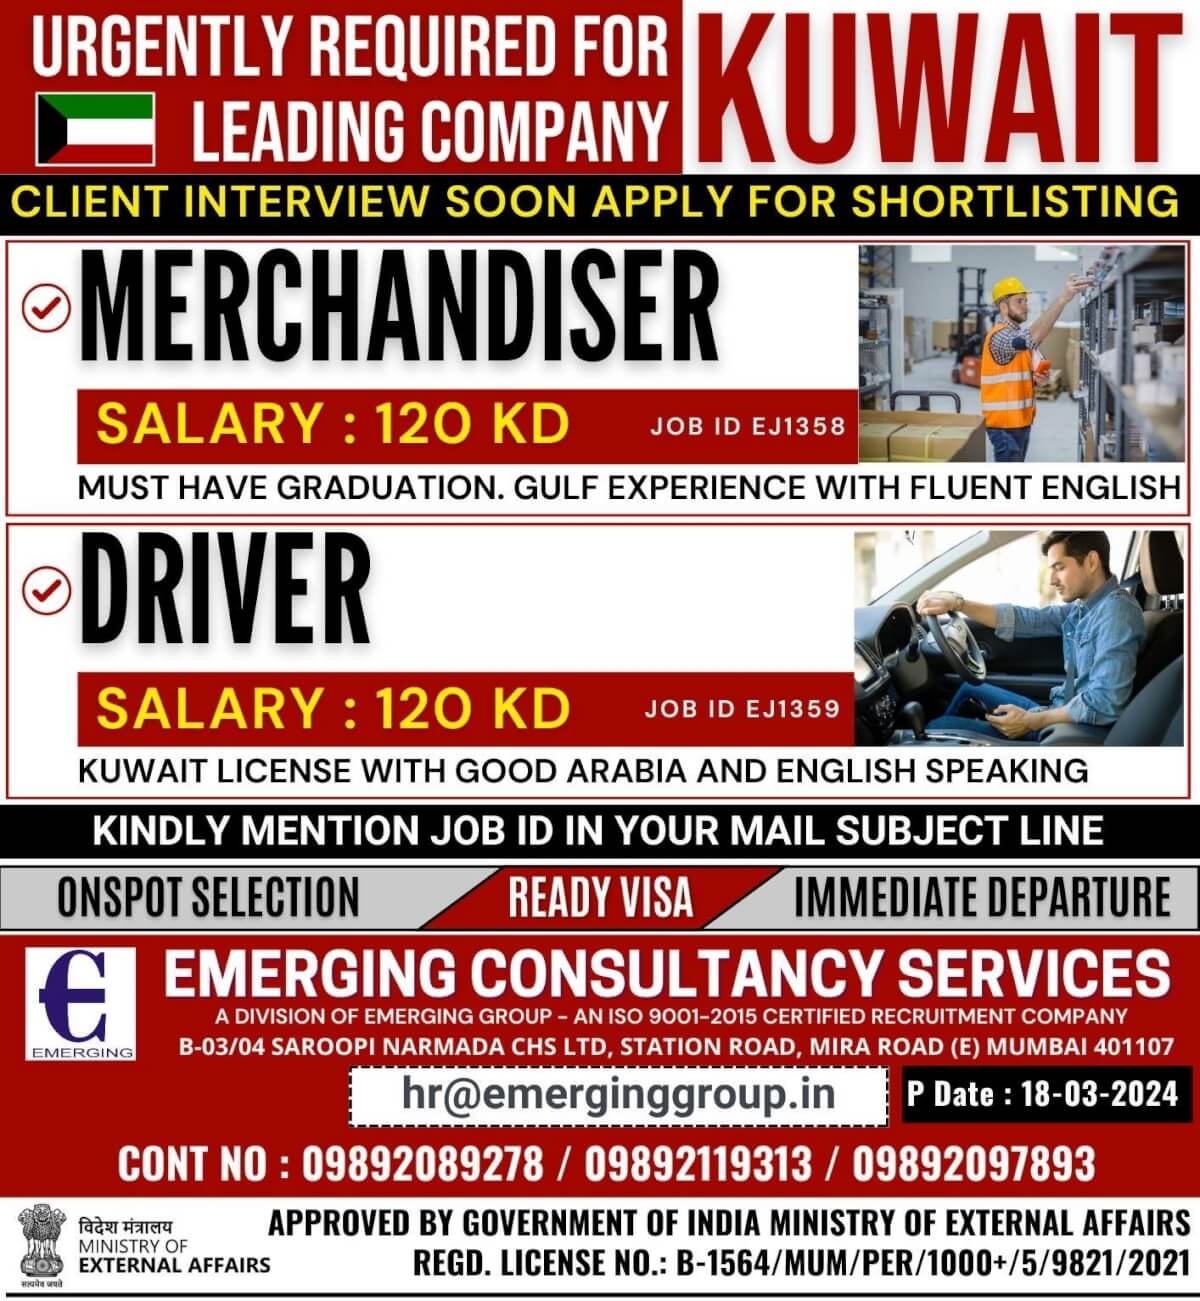 URGENTLY REQUIRED FOR  LEADING COMPANY IN KUWAIT - CLIENT INTERVIEW SOON APPLY FOR SHORTLISTING